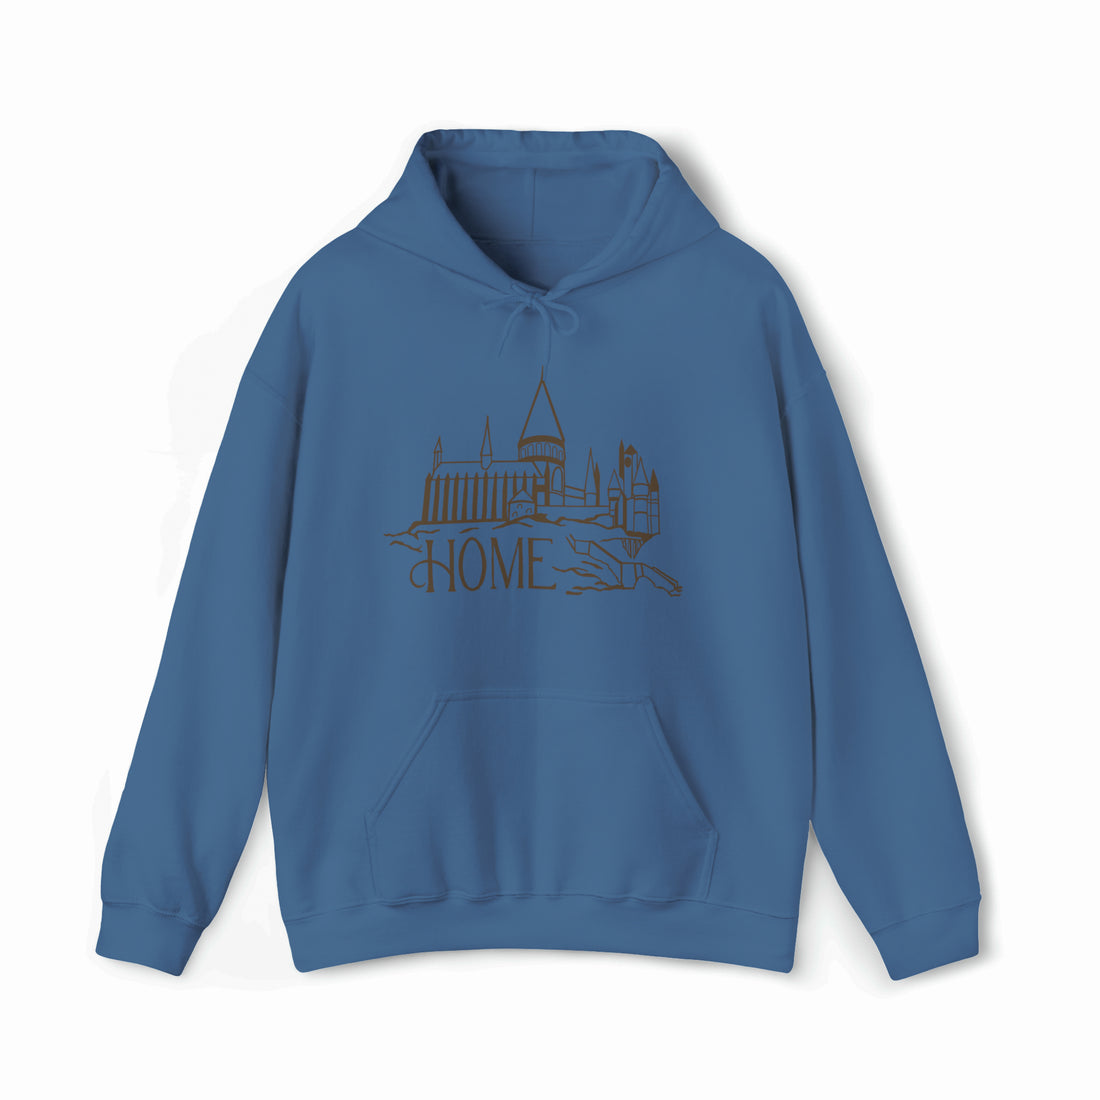 Home: WITTY Embroidered Sweatshirt